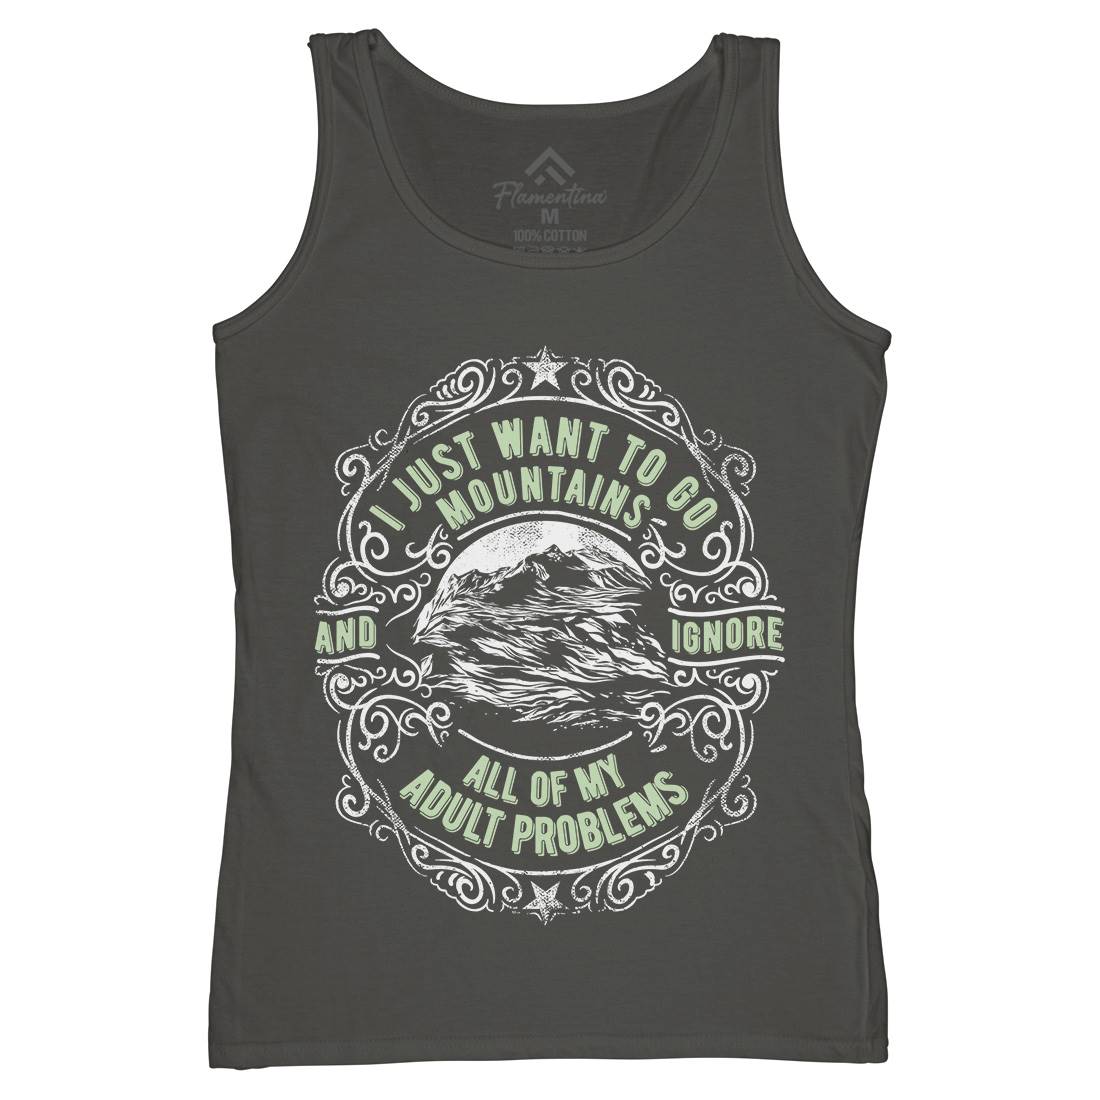 I Want To Go Mountains Womens Organic Tank Top Vest Nature C948